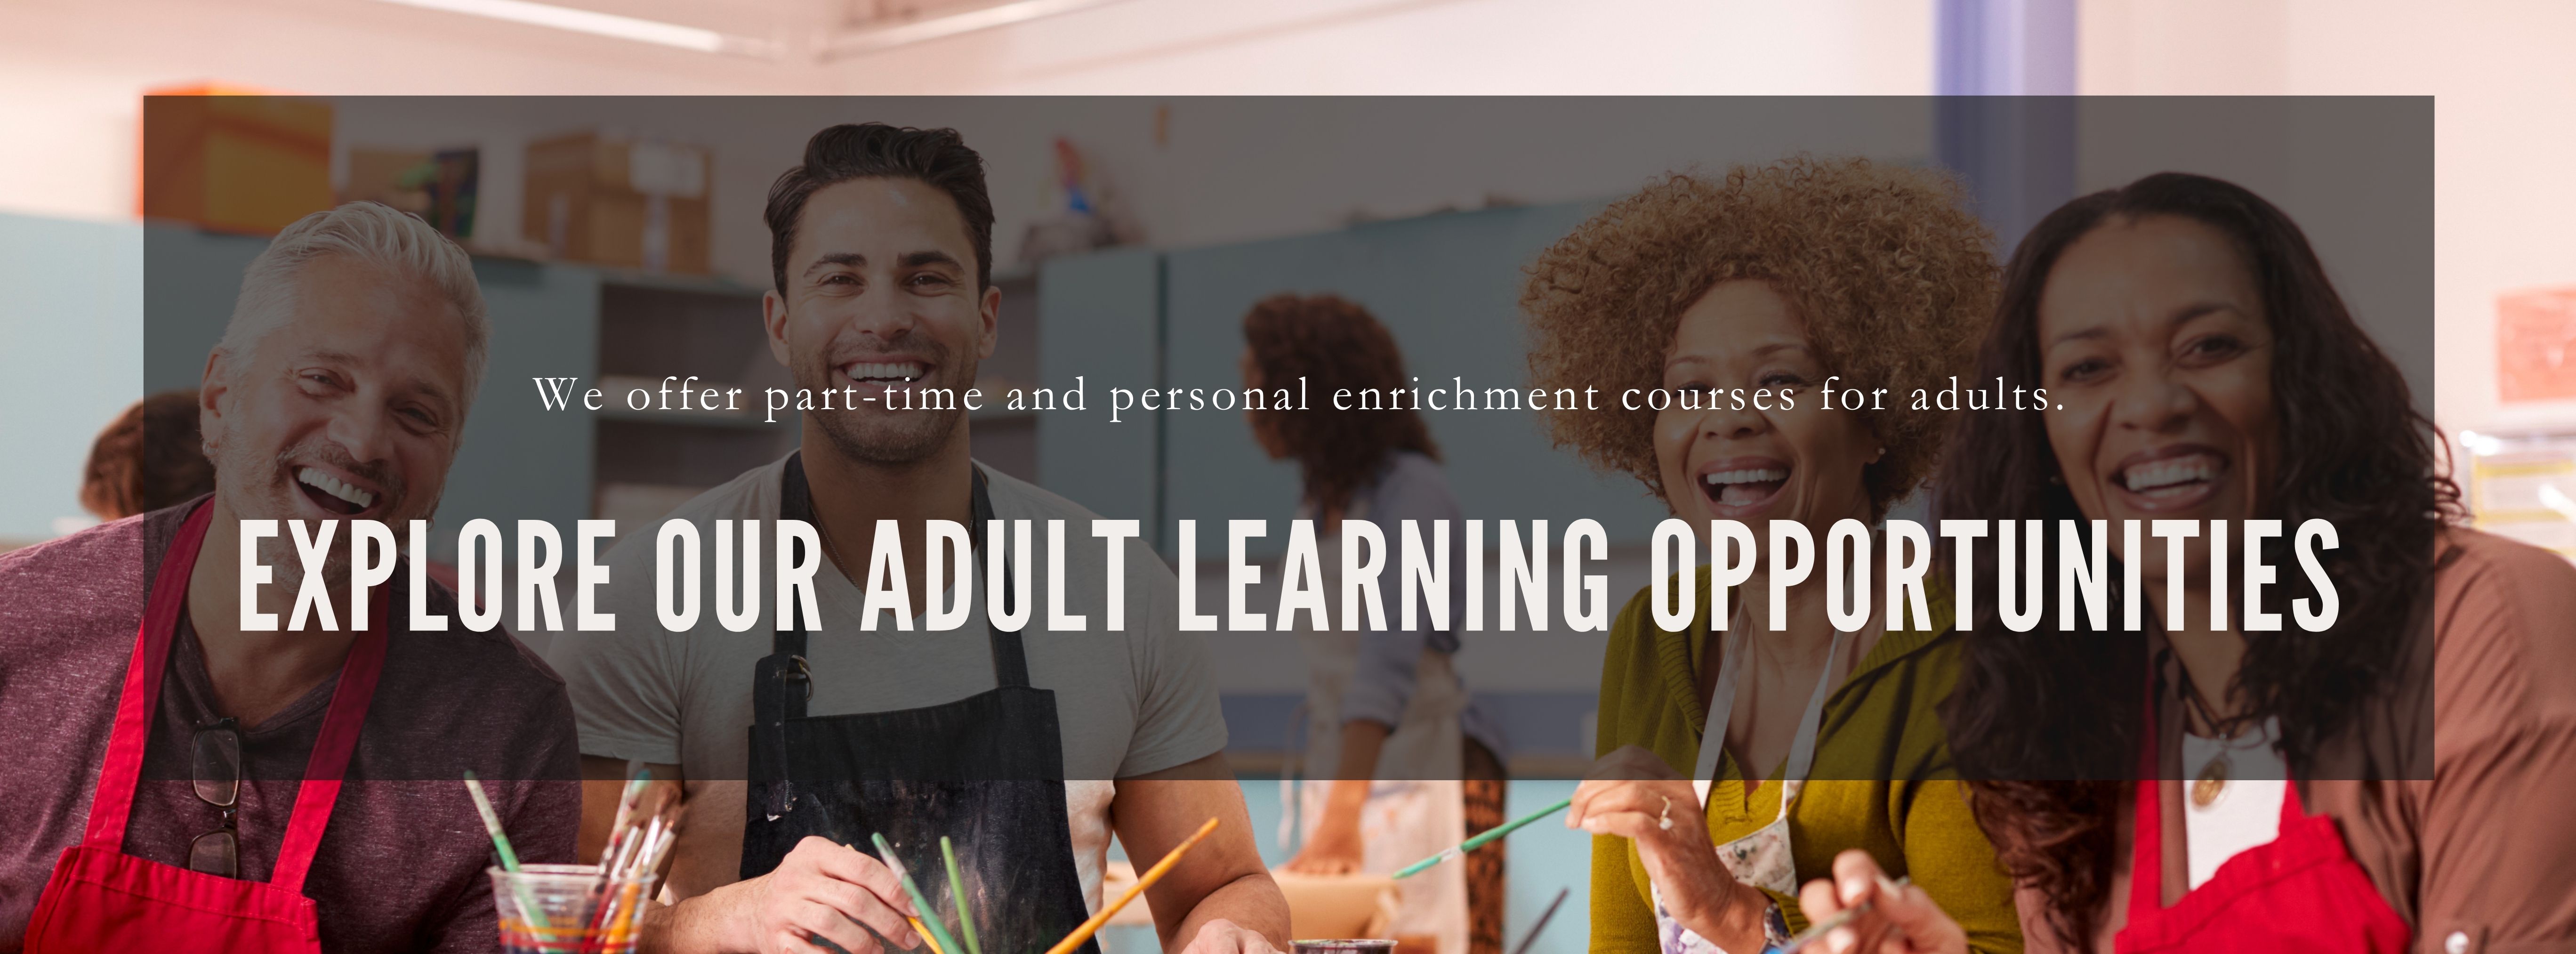 Adult course banner